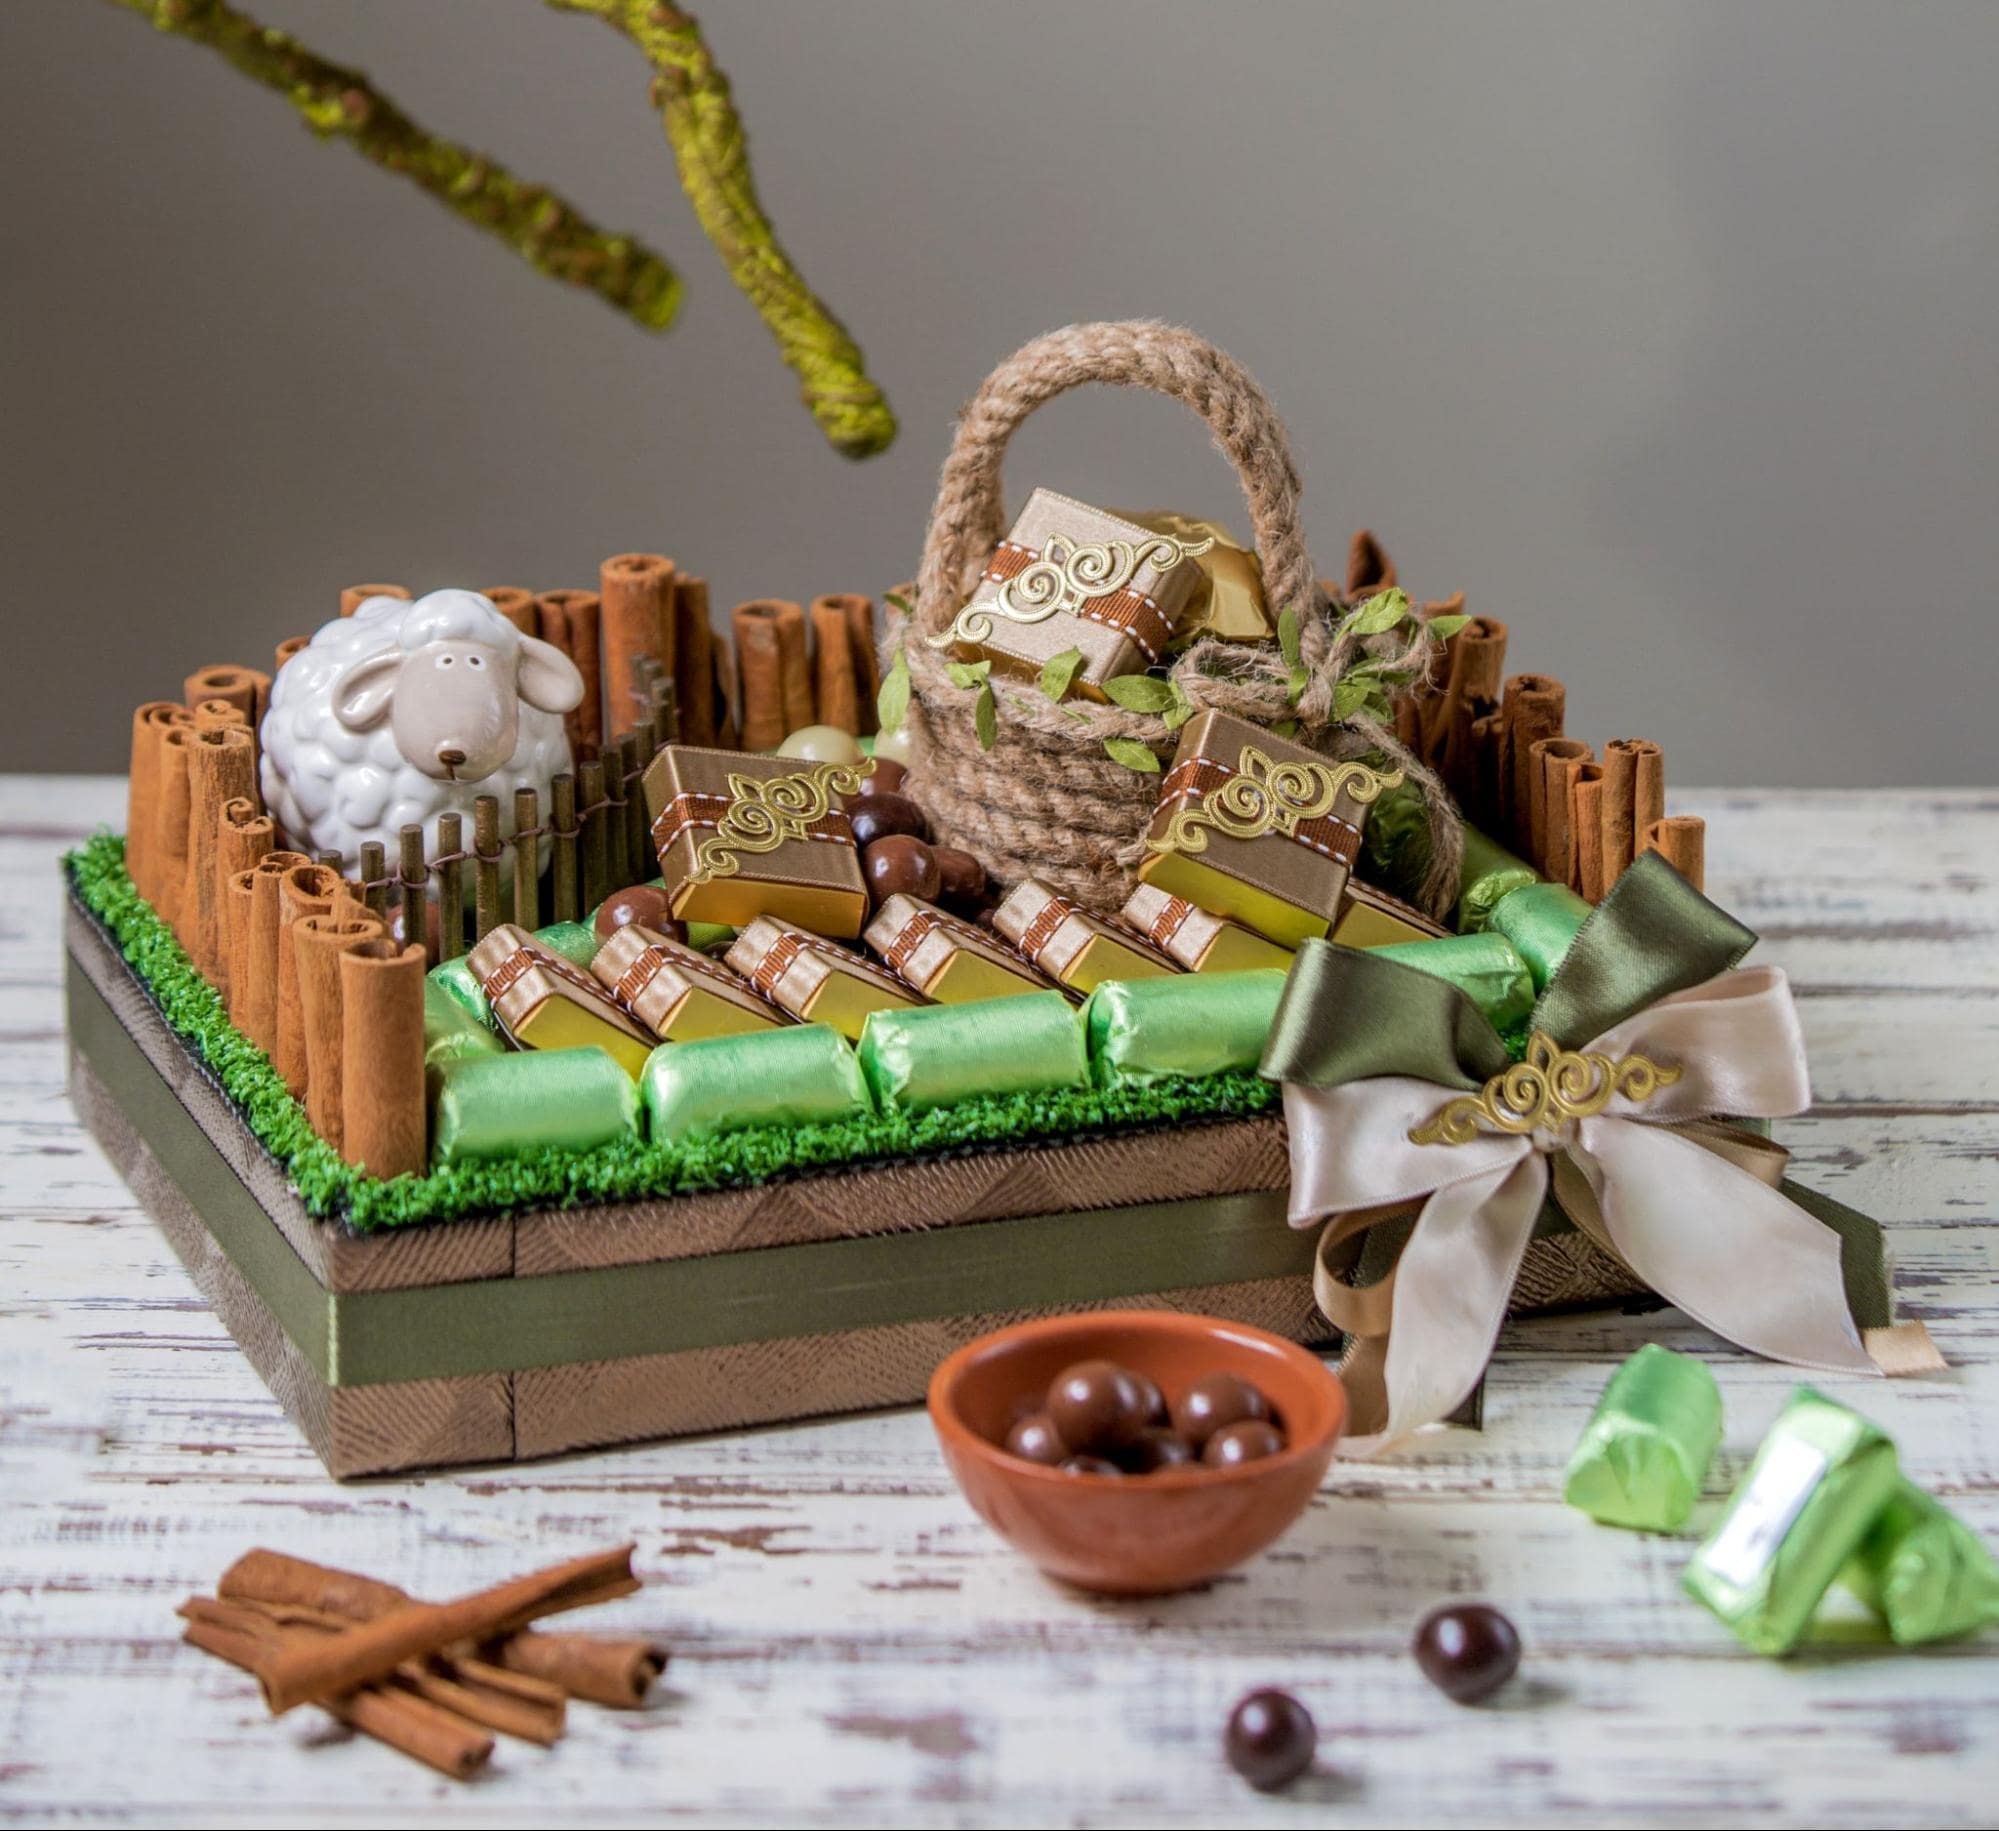 Mouthwatering chocolates and candies elegantly presented on a wooden tray—a perfect choice for Chinese New Year gifts.